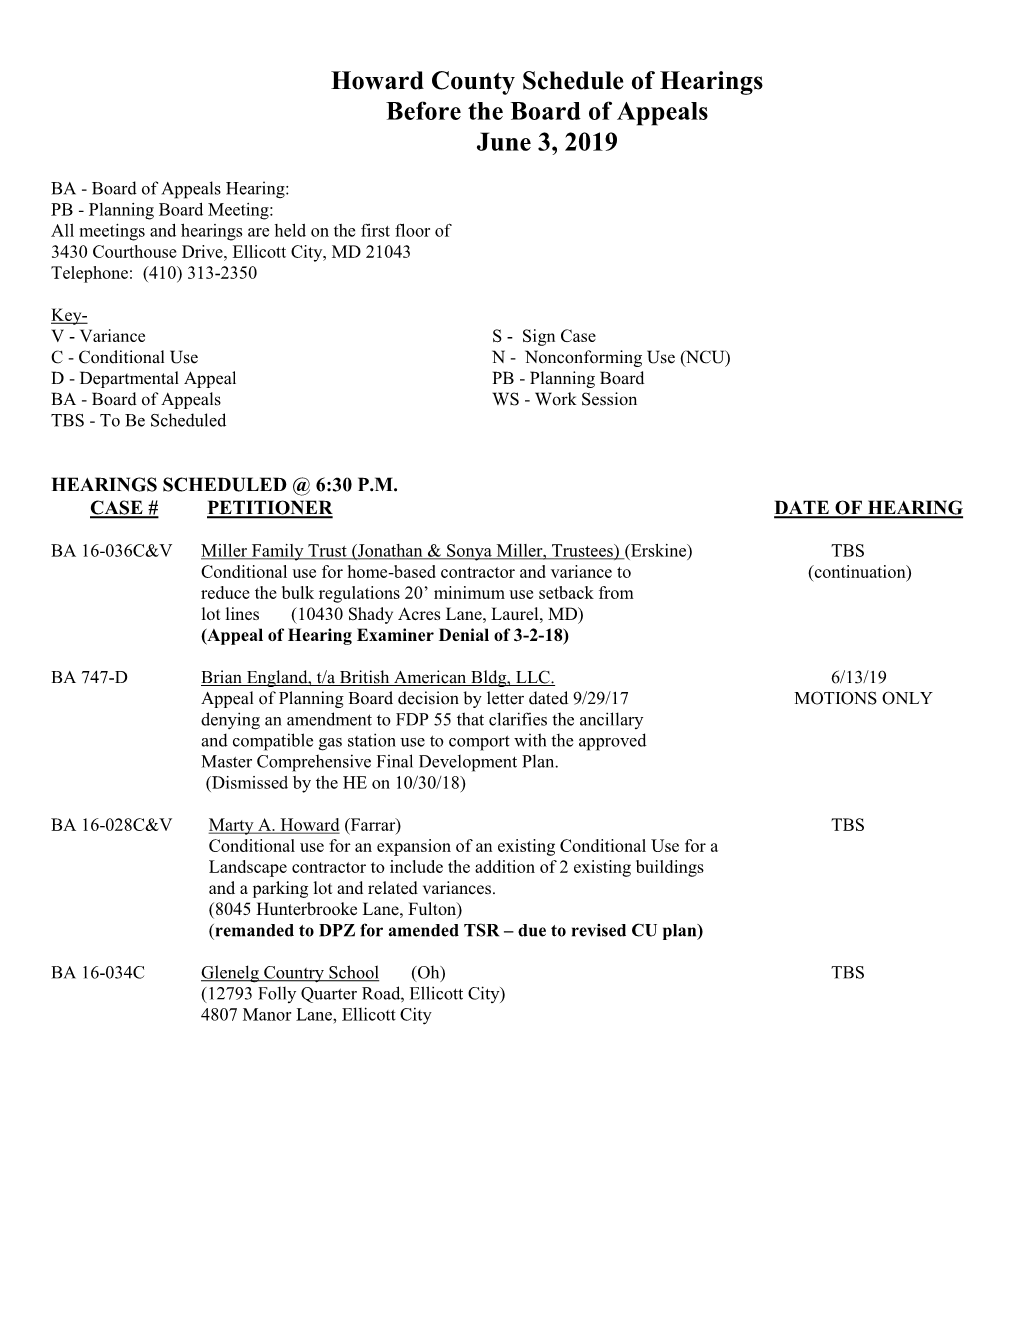 Howard County Schedule of Hearings Before the Board of Appeals June 3, 2019